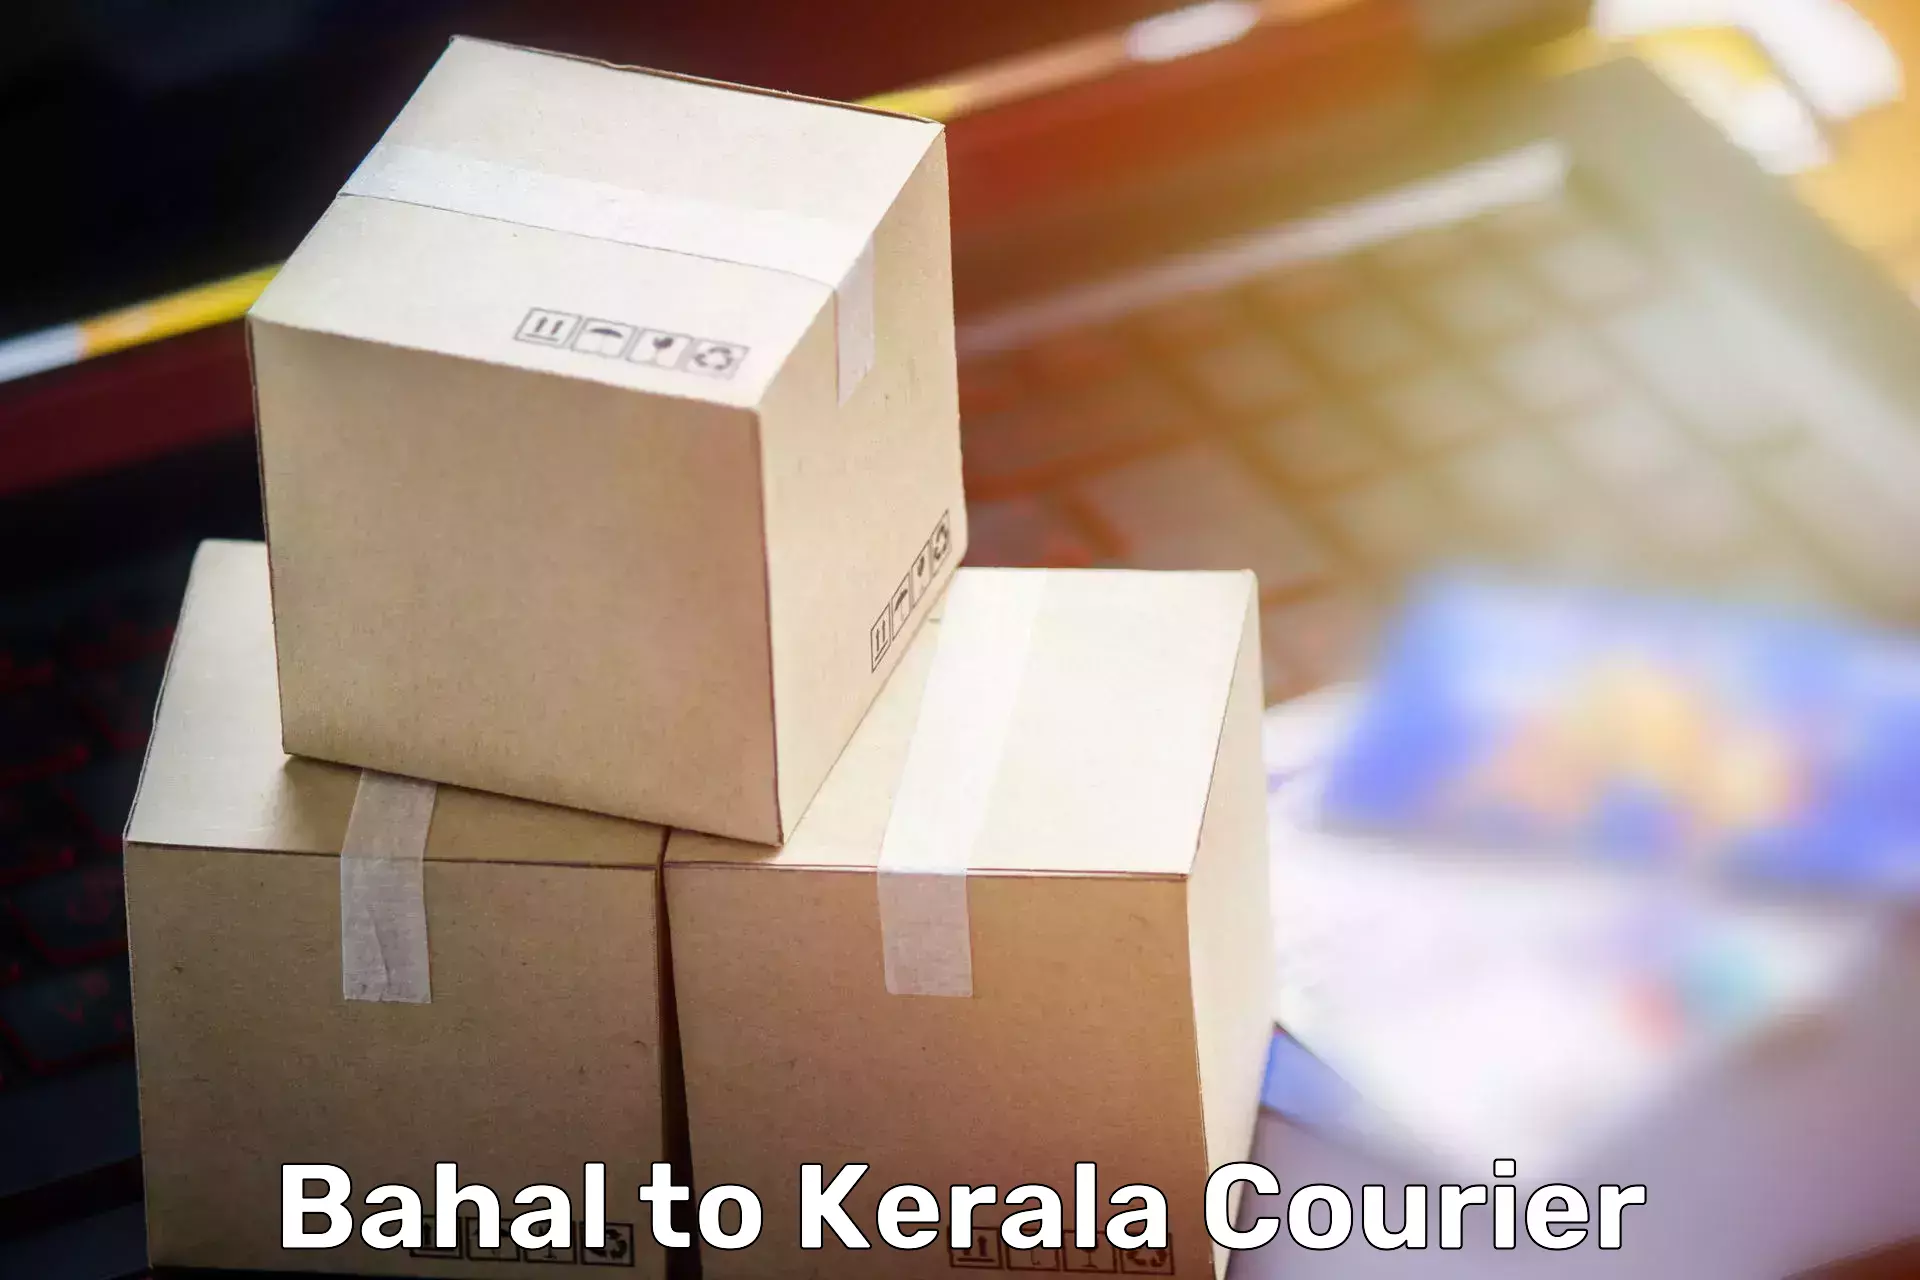 Quality moving and storage Bahal to Cochin